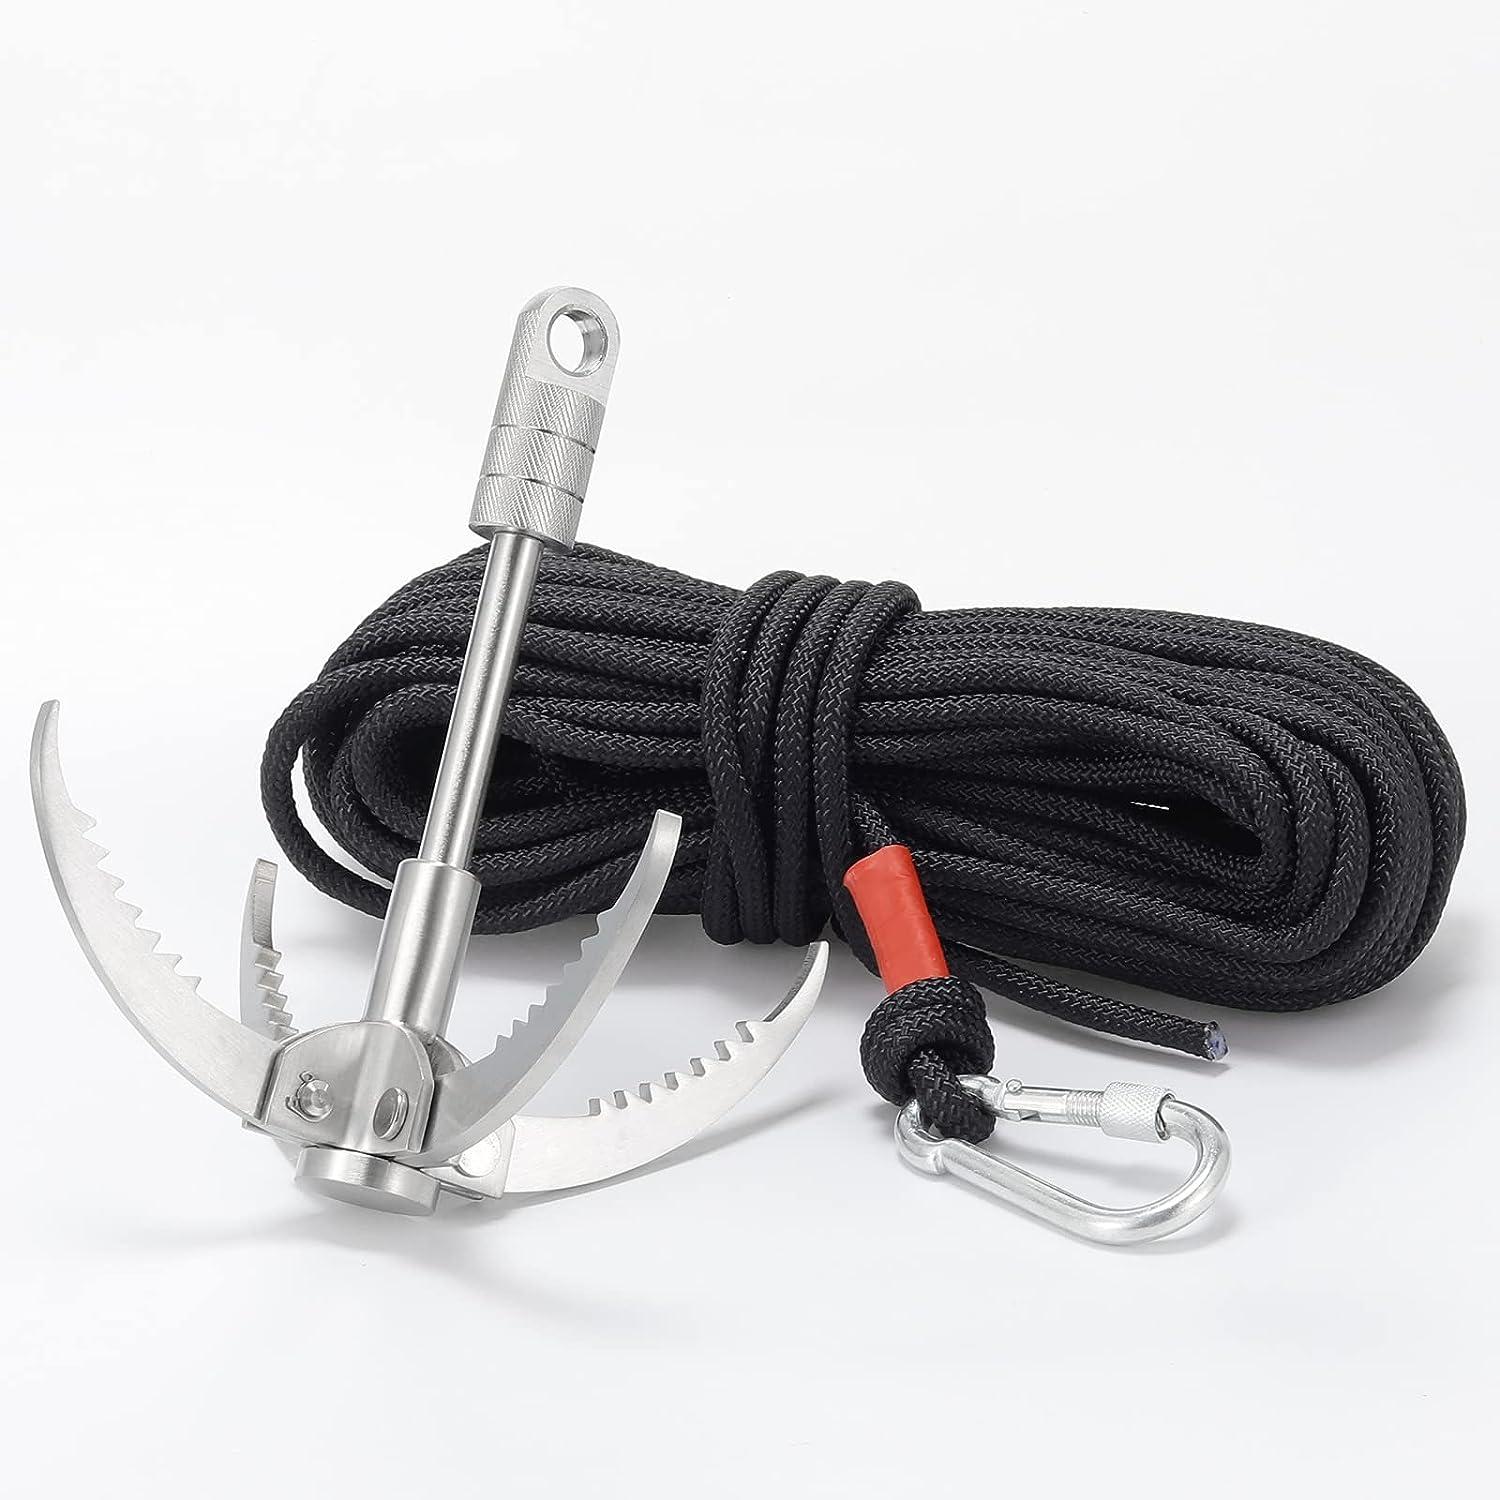 GYANDULY Large Grappling Hook with 65ft Rope, 4-Claw Folding Stainless  Steel Grapple Hooks for Outdoor Survival, Camping, Hiking, Tree &Mountain  Climbing